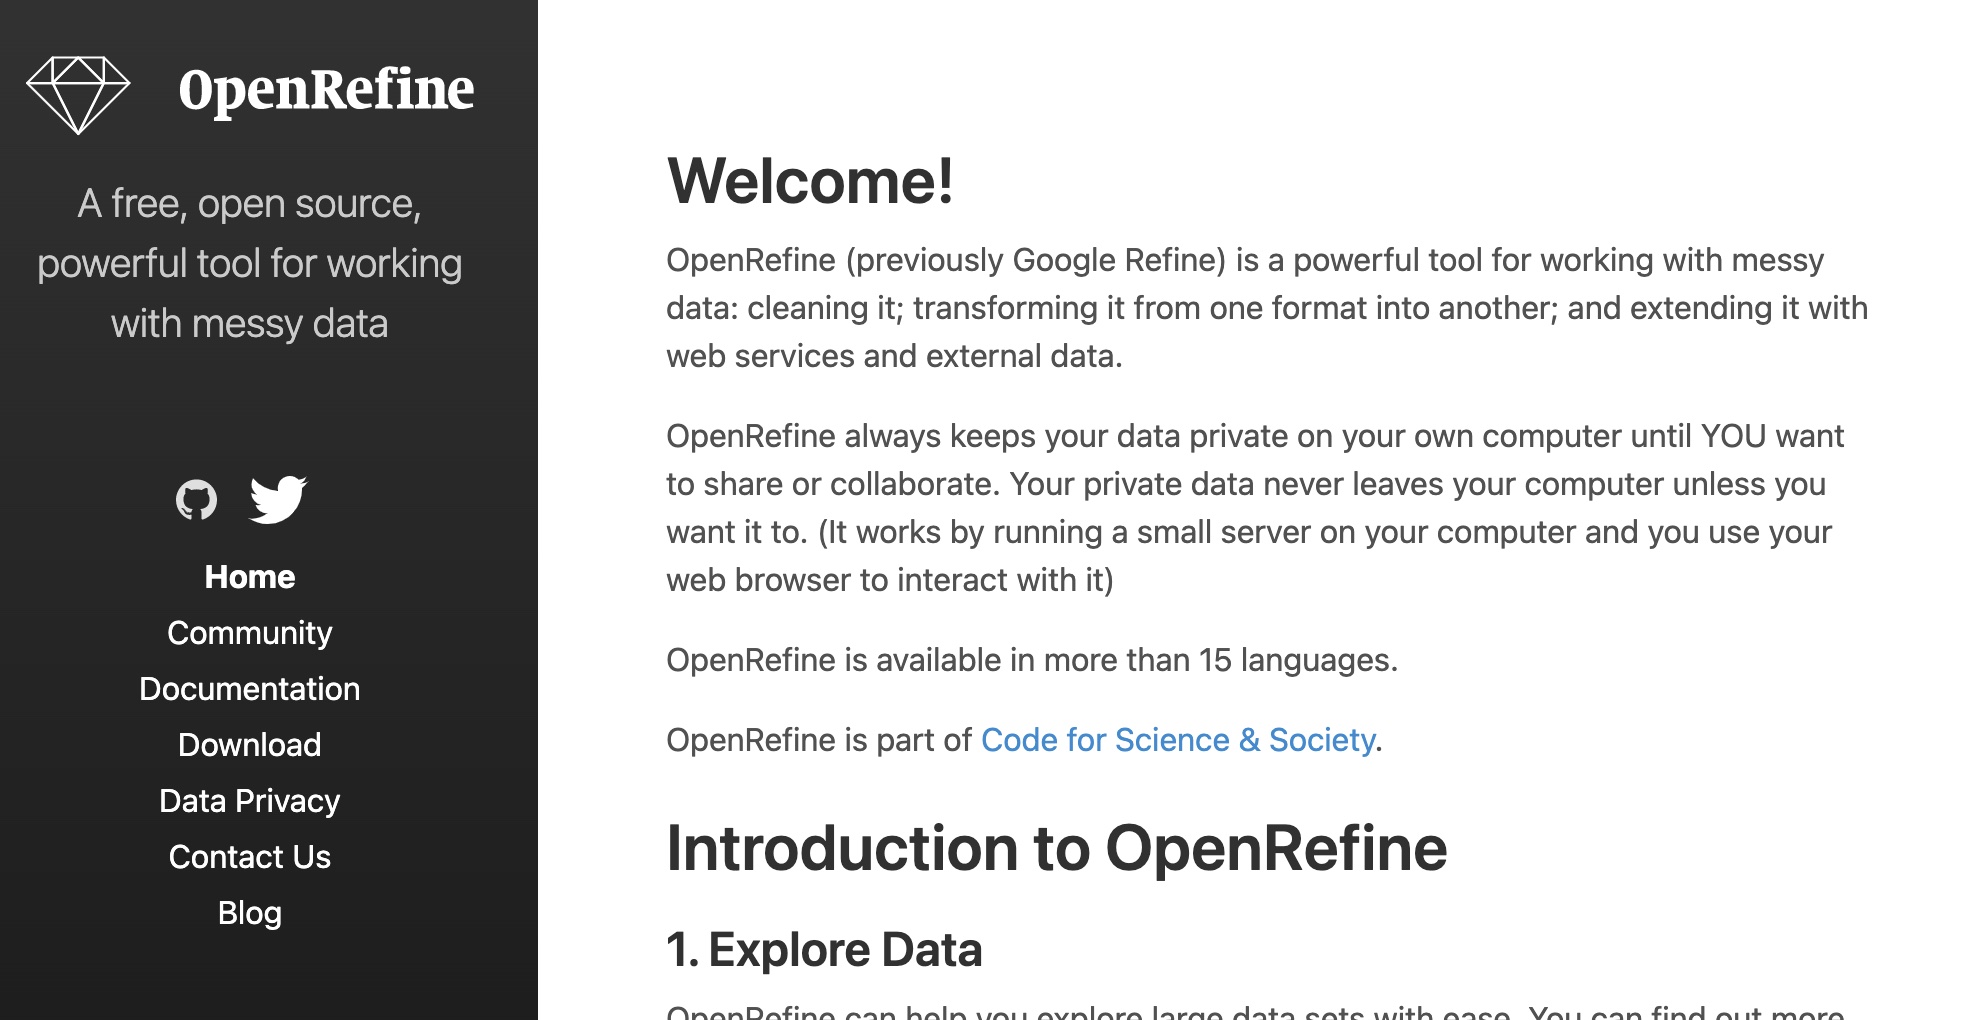 The homepage for Google's OpenRefine